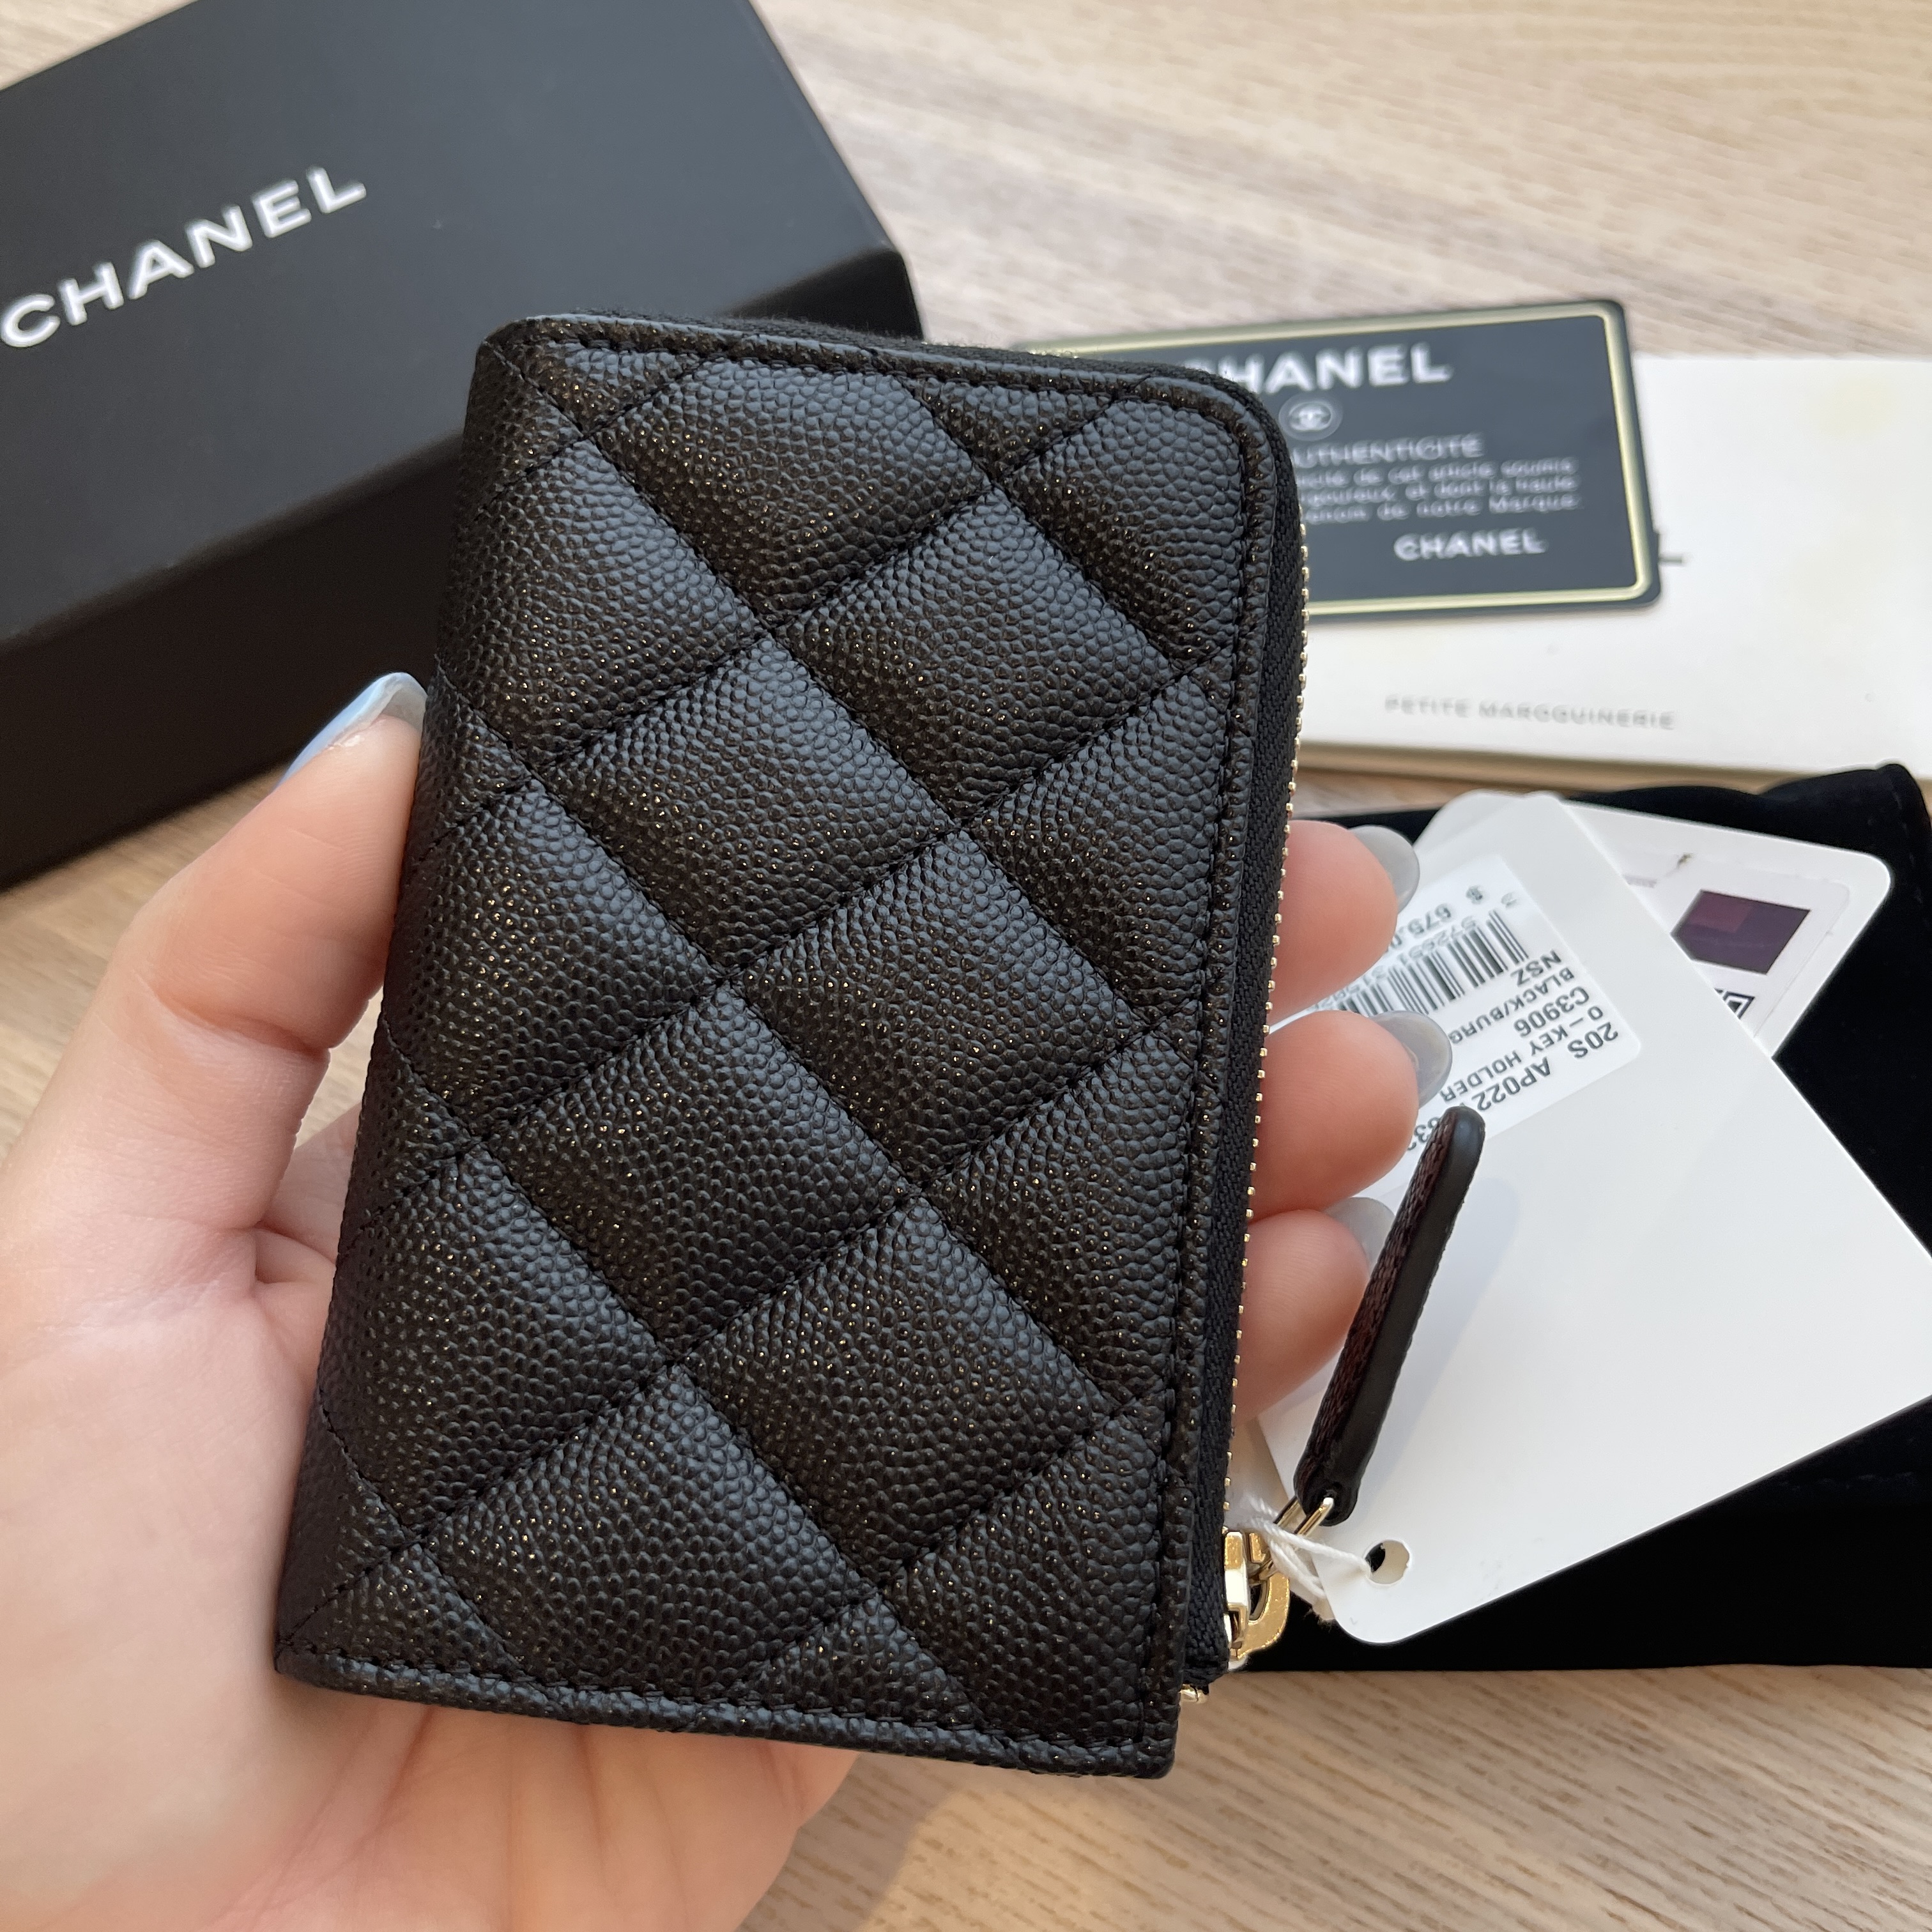 CHANEL Lambskin Quilted Small Chic Riviera Top Handle Vanity Case Black  1305172